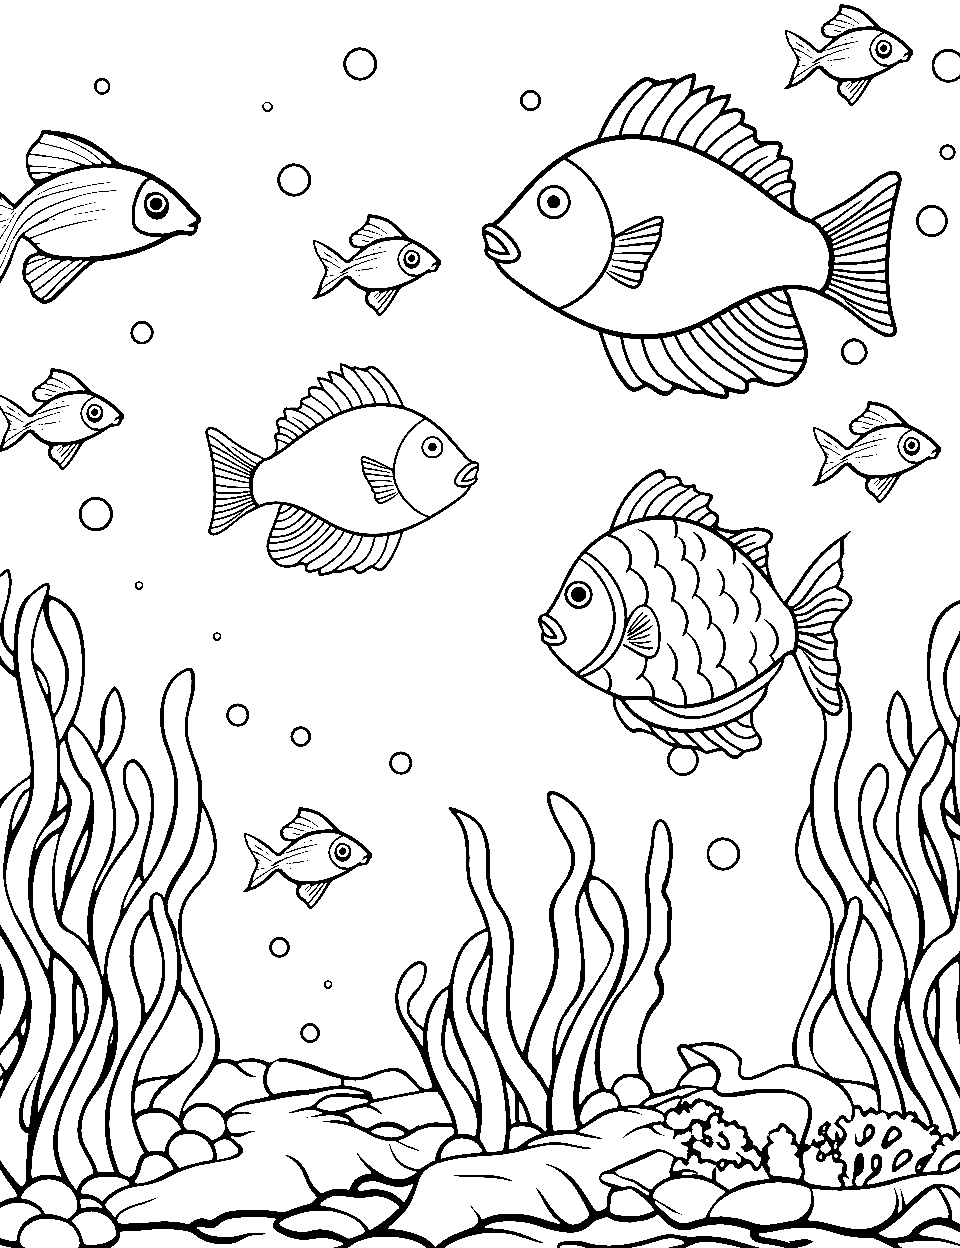 Ocean Odyssey Coloring Page - Fish swimming in the ocean with seaweed and bubbles.